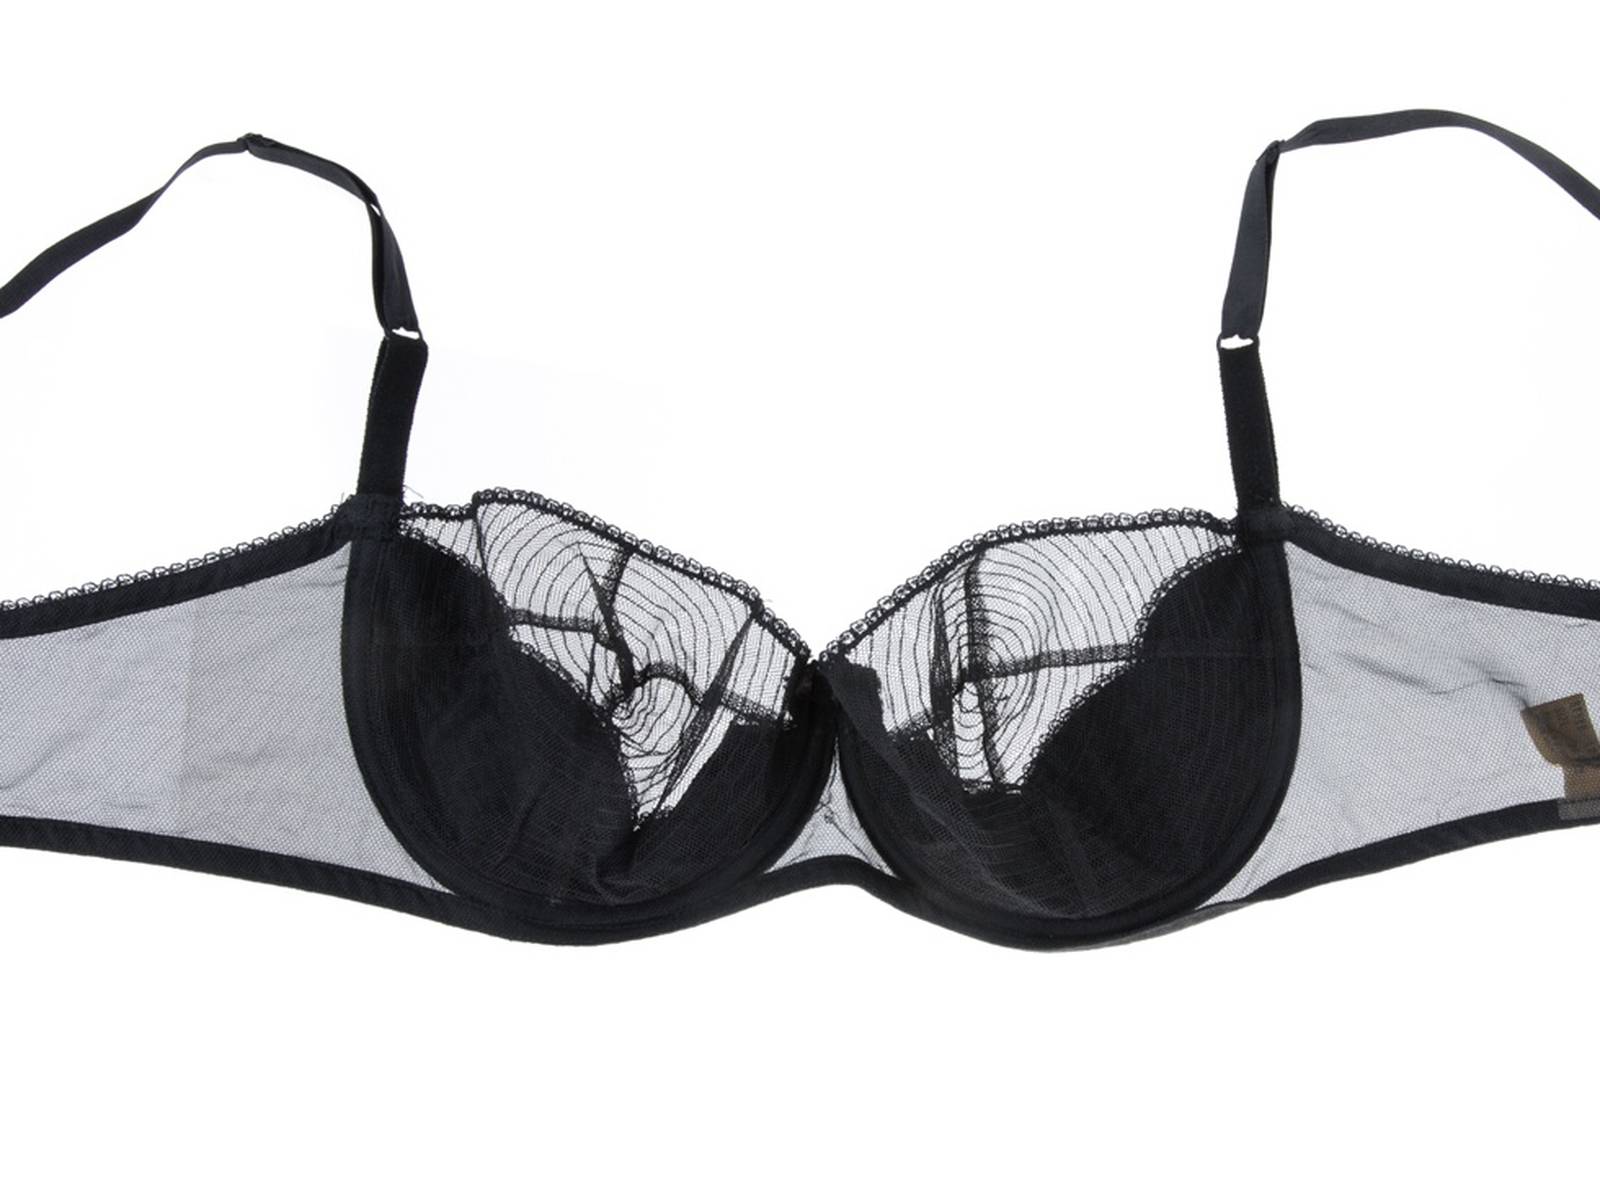 Sales of Marilyn Monroe pointy bras on the rise